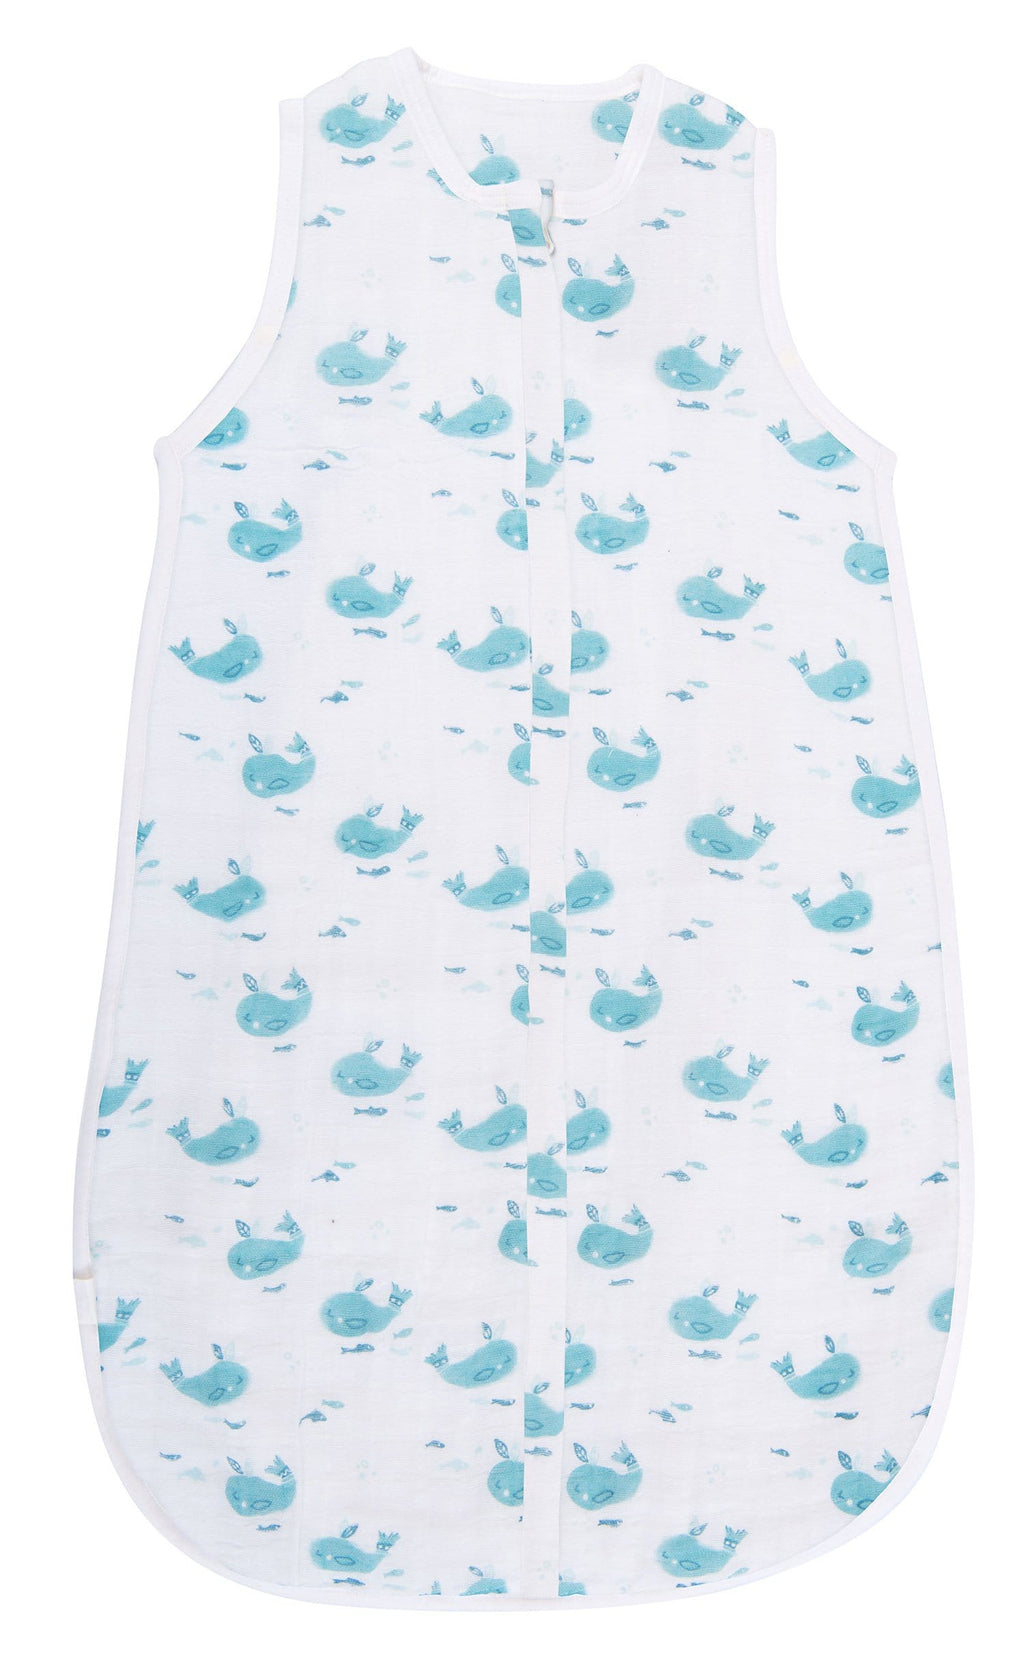 This charming baby sleeping bag made of muslin with blue whale print is perfect to wrap baby in a cocoon of softness from 6 up to 36 months. Soft and light, it is adapted to summer temperatures thanks to its breathable fabric. The length can be adjusted using press-studs as the child grows. 